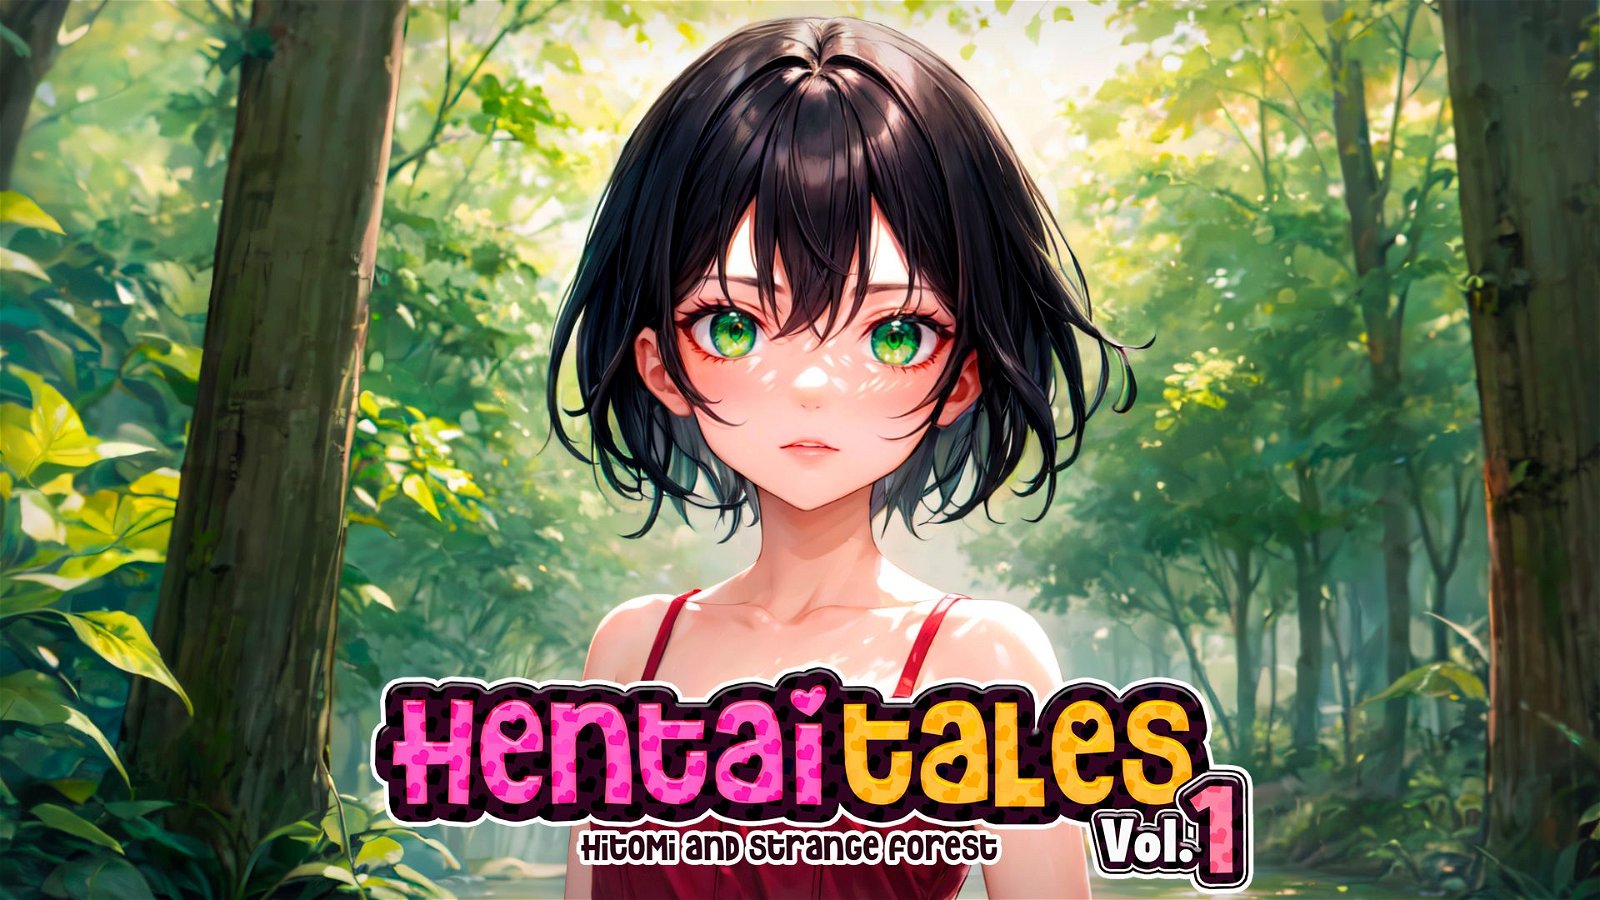 Image of Hentai Tales Vol. 1